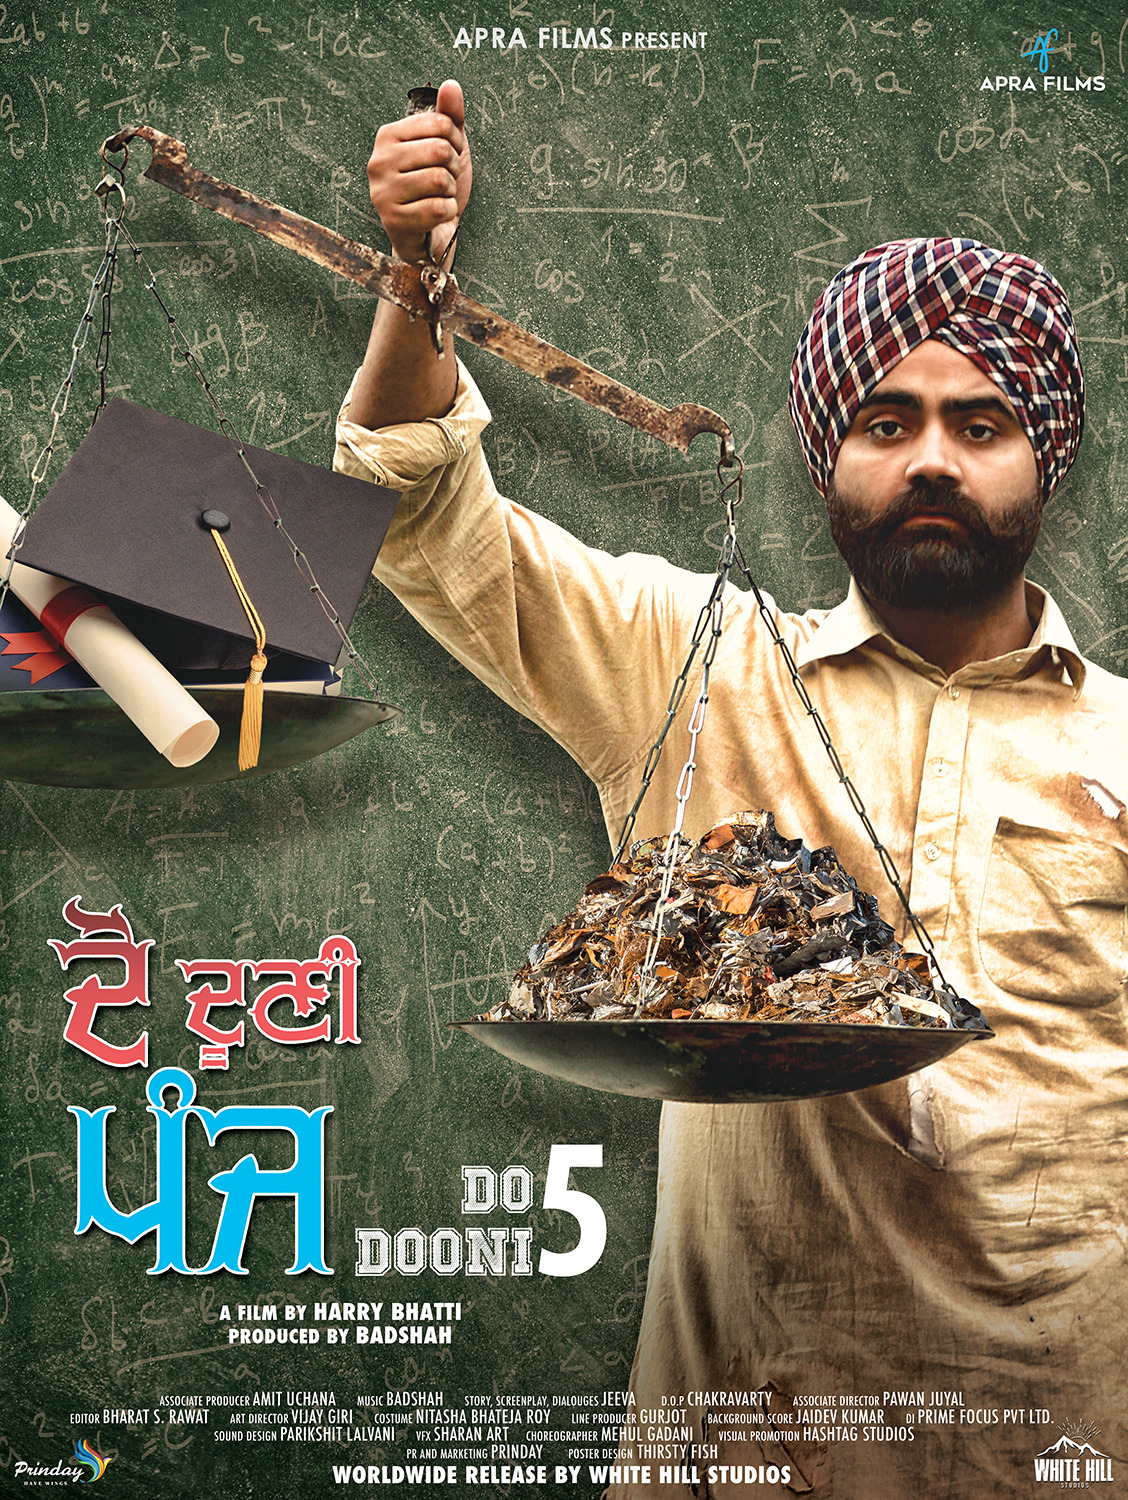 Extra Large Movie Poster Image for Do Dooni Panj 